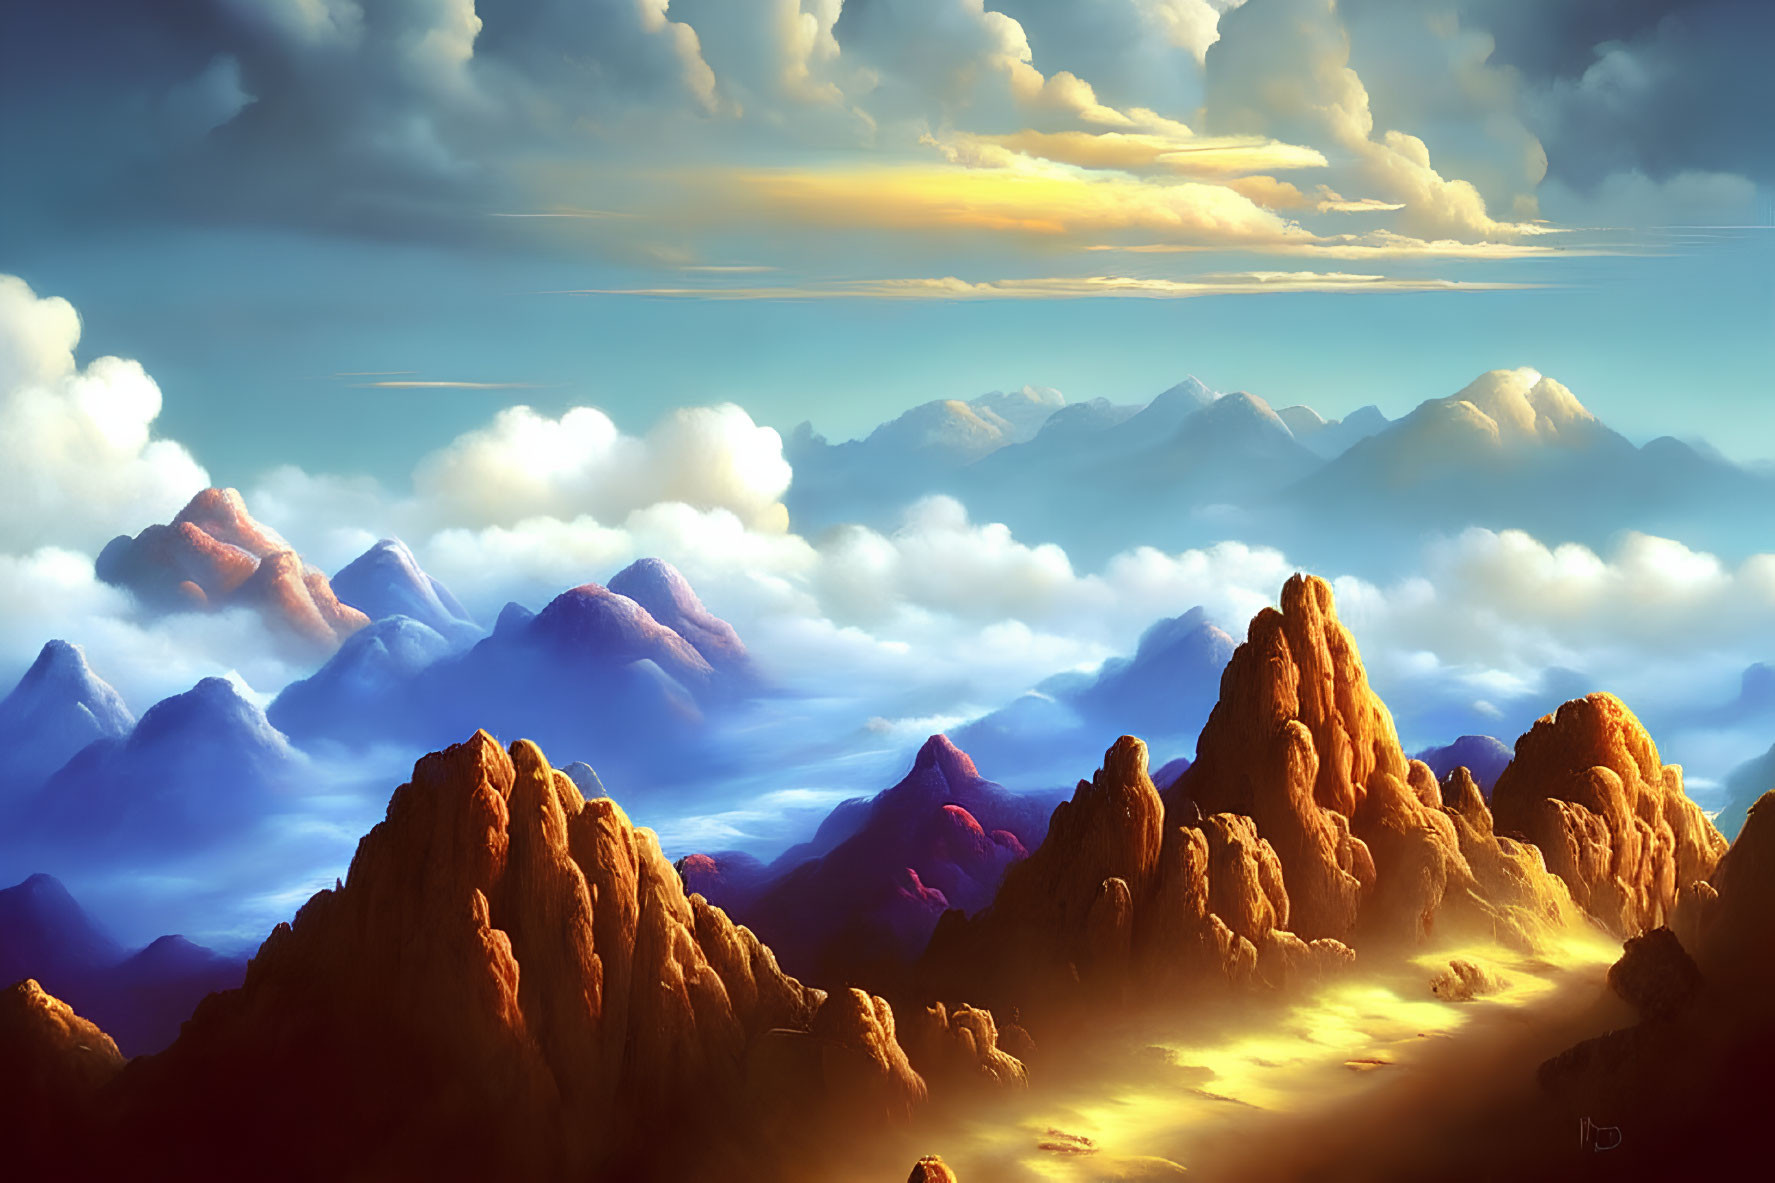 Vibrant digital artwork of dreamy landscape with towering mountains